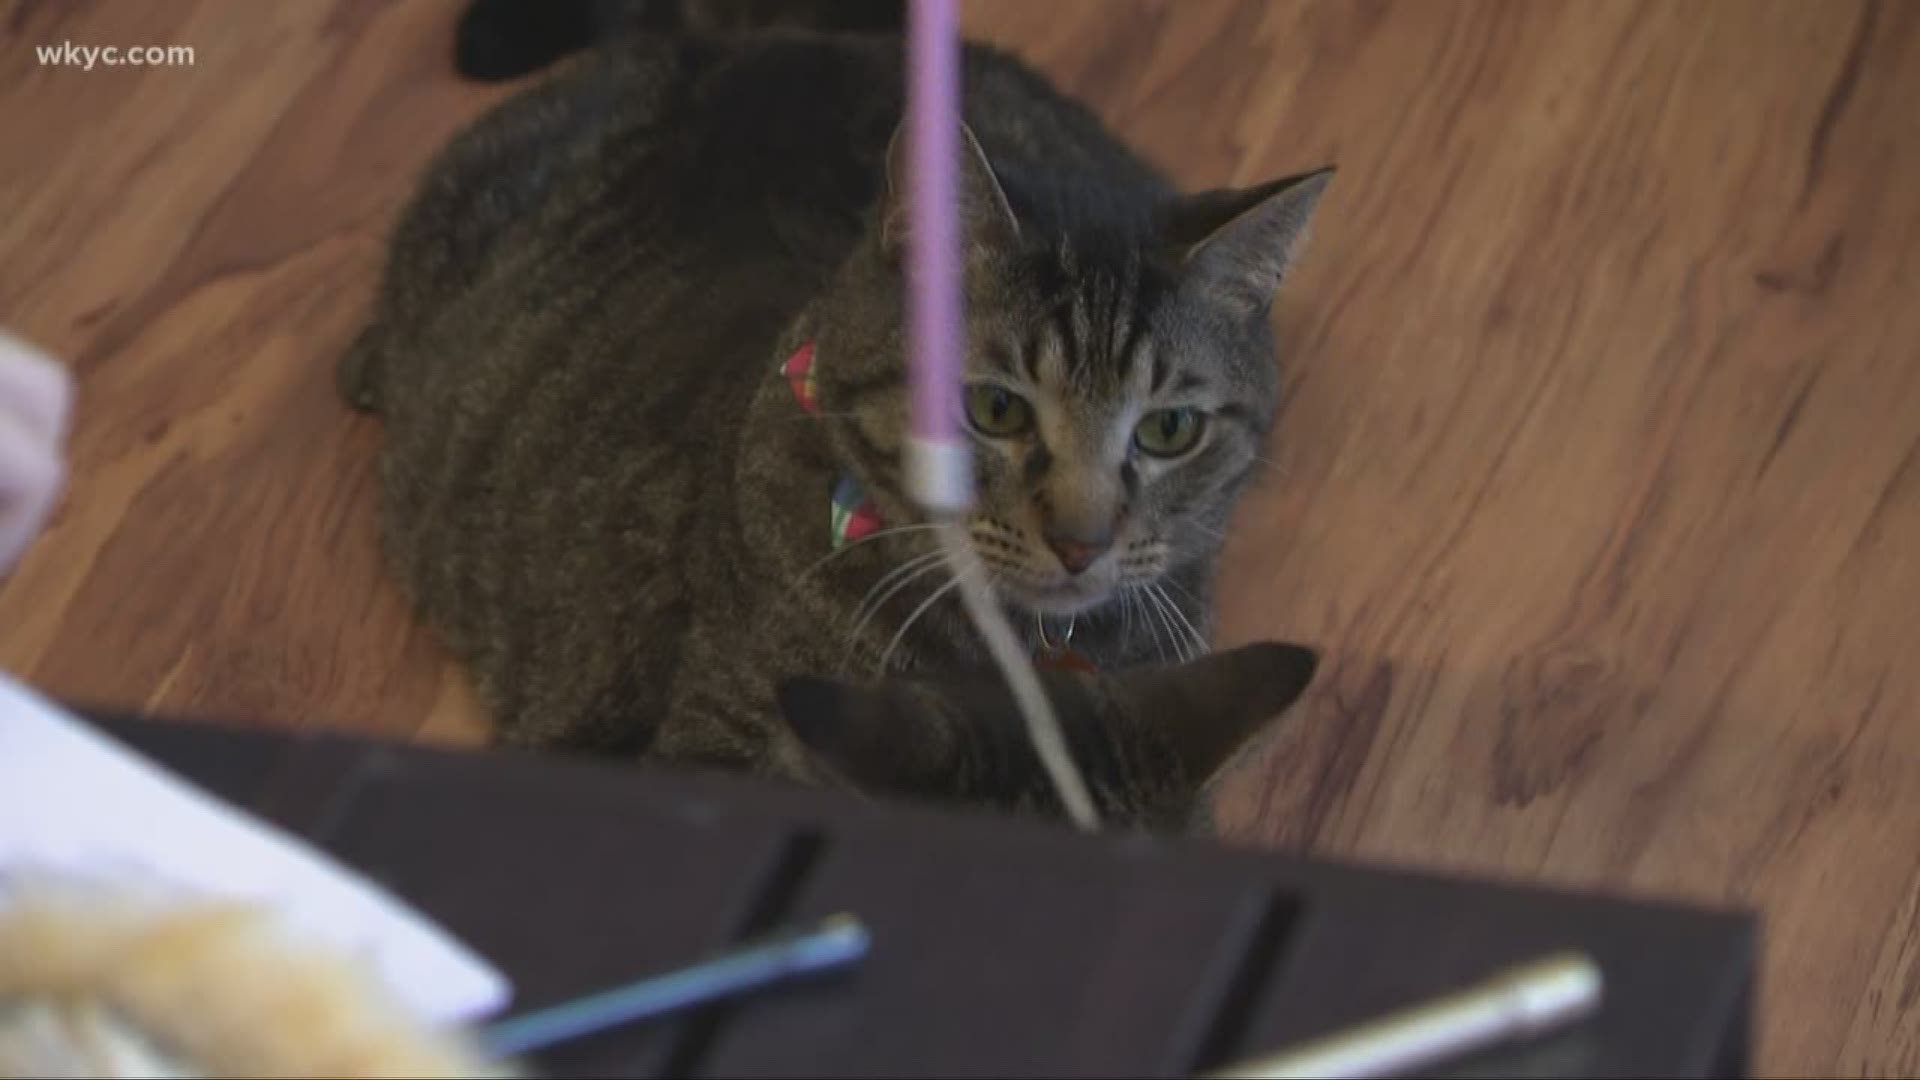 Jan. 3, 2019: There's a new place in Cleveland for all you cat lovers. WKYC's Jasmine Monroe gives us a tour of the new affoGATO Cat Cafe.